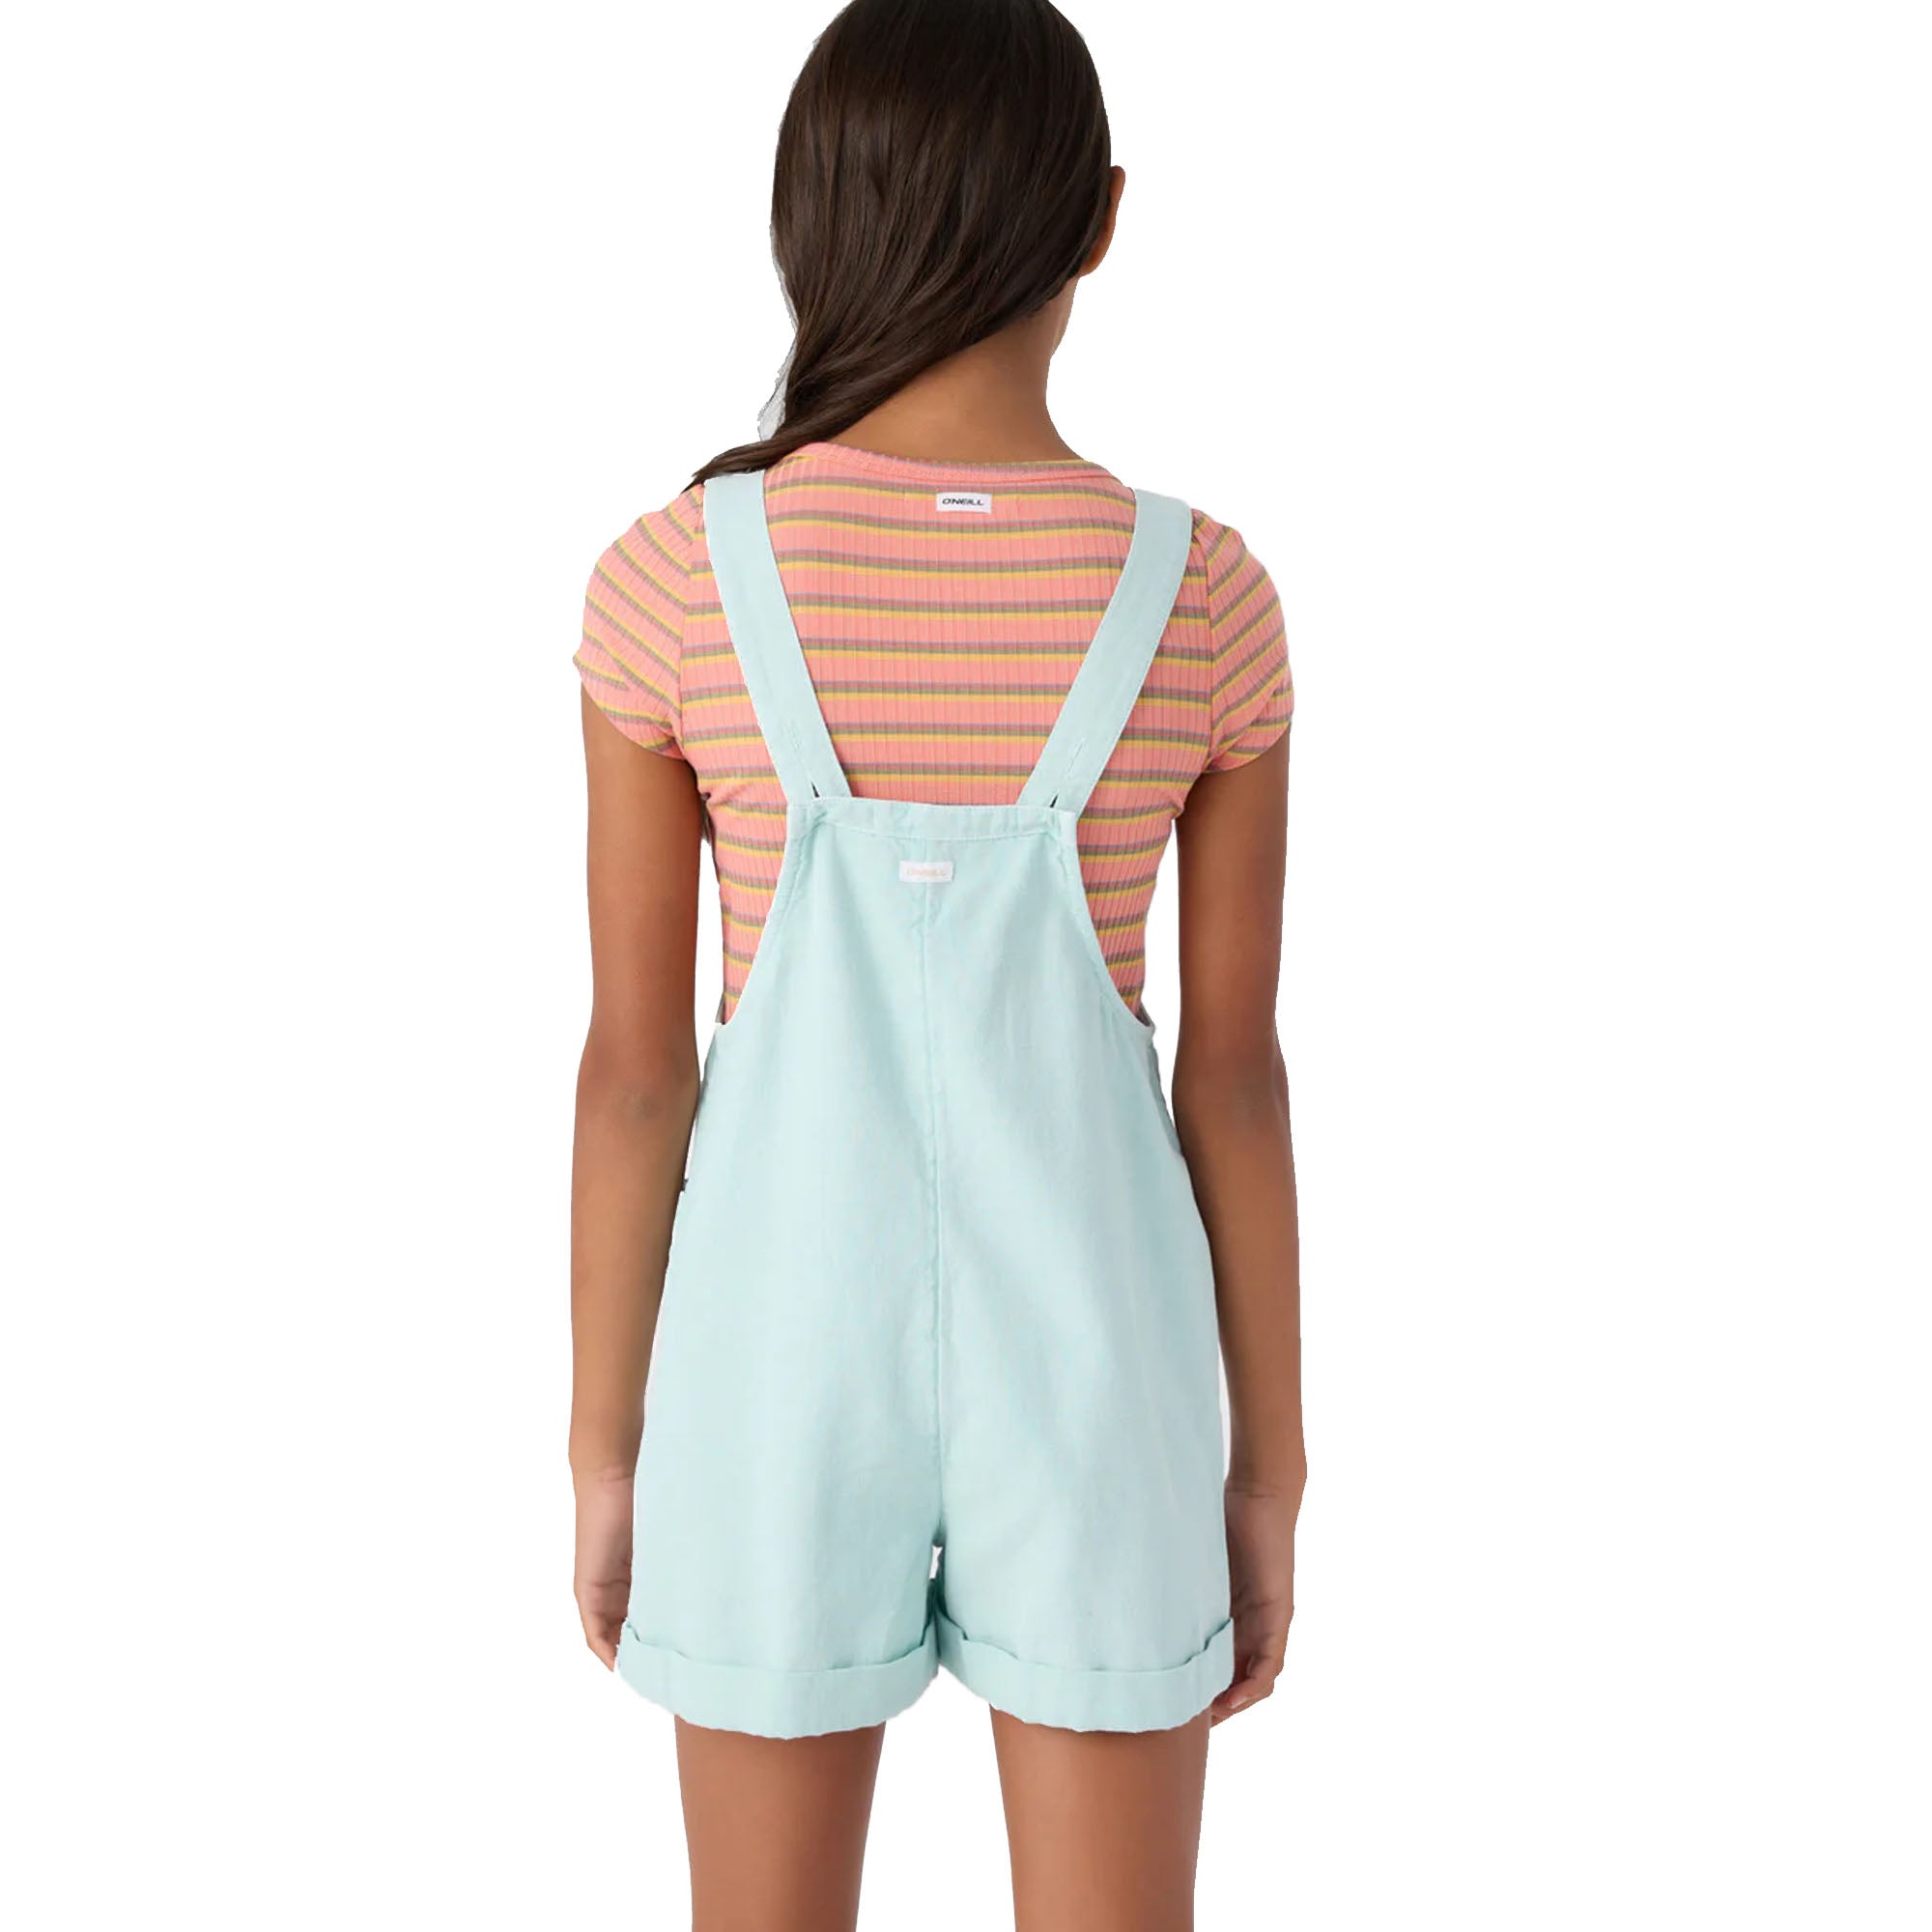 O'Neill Starlette Youth Girl's Overalls